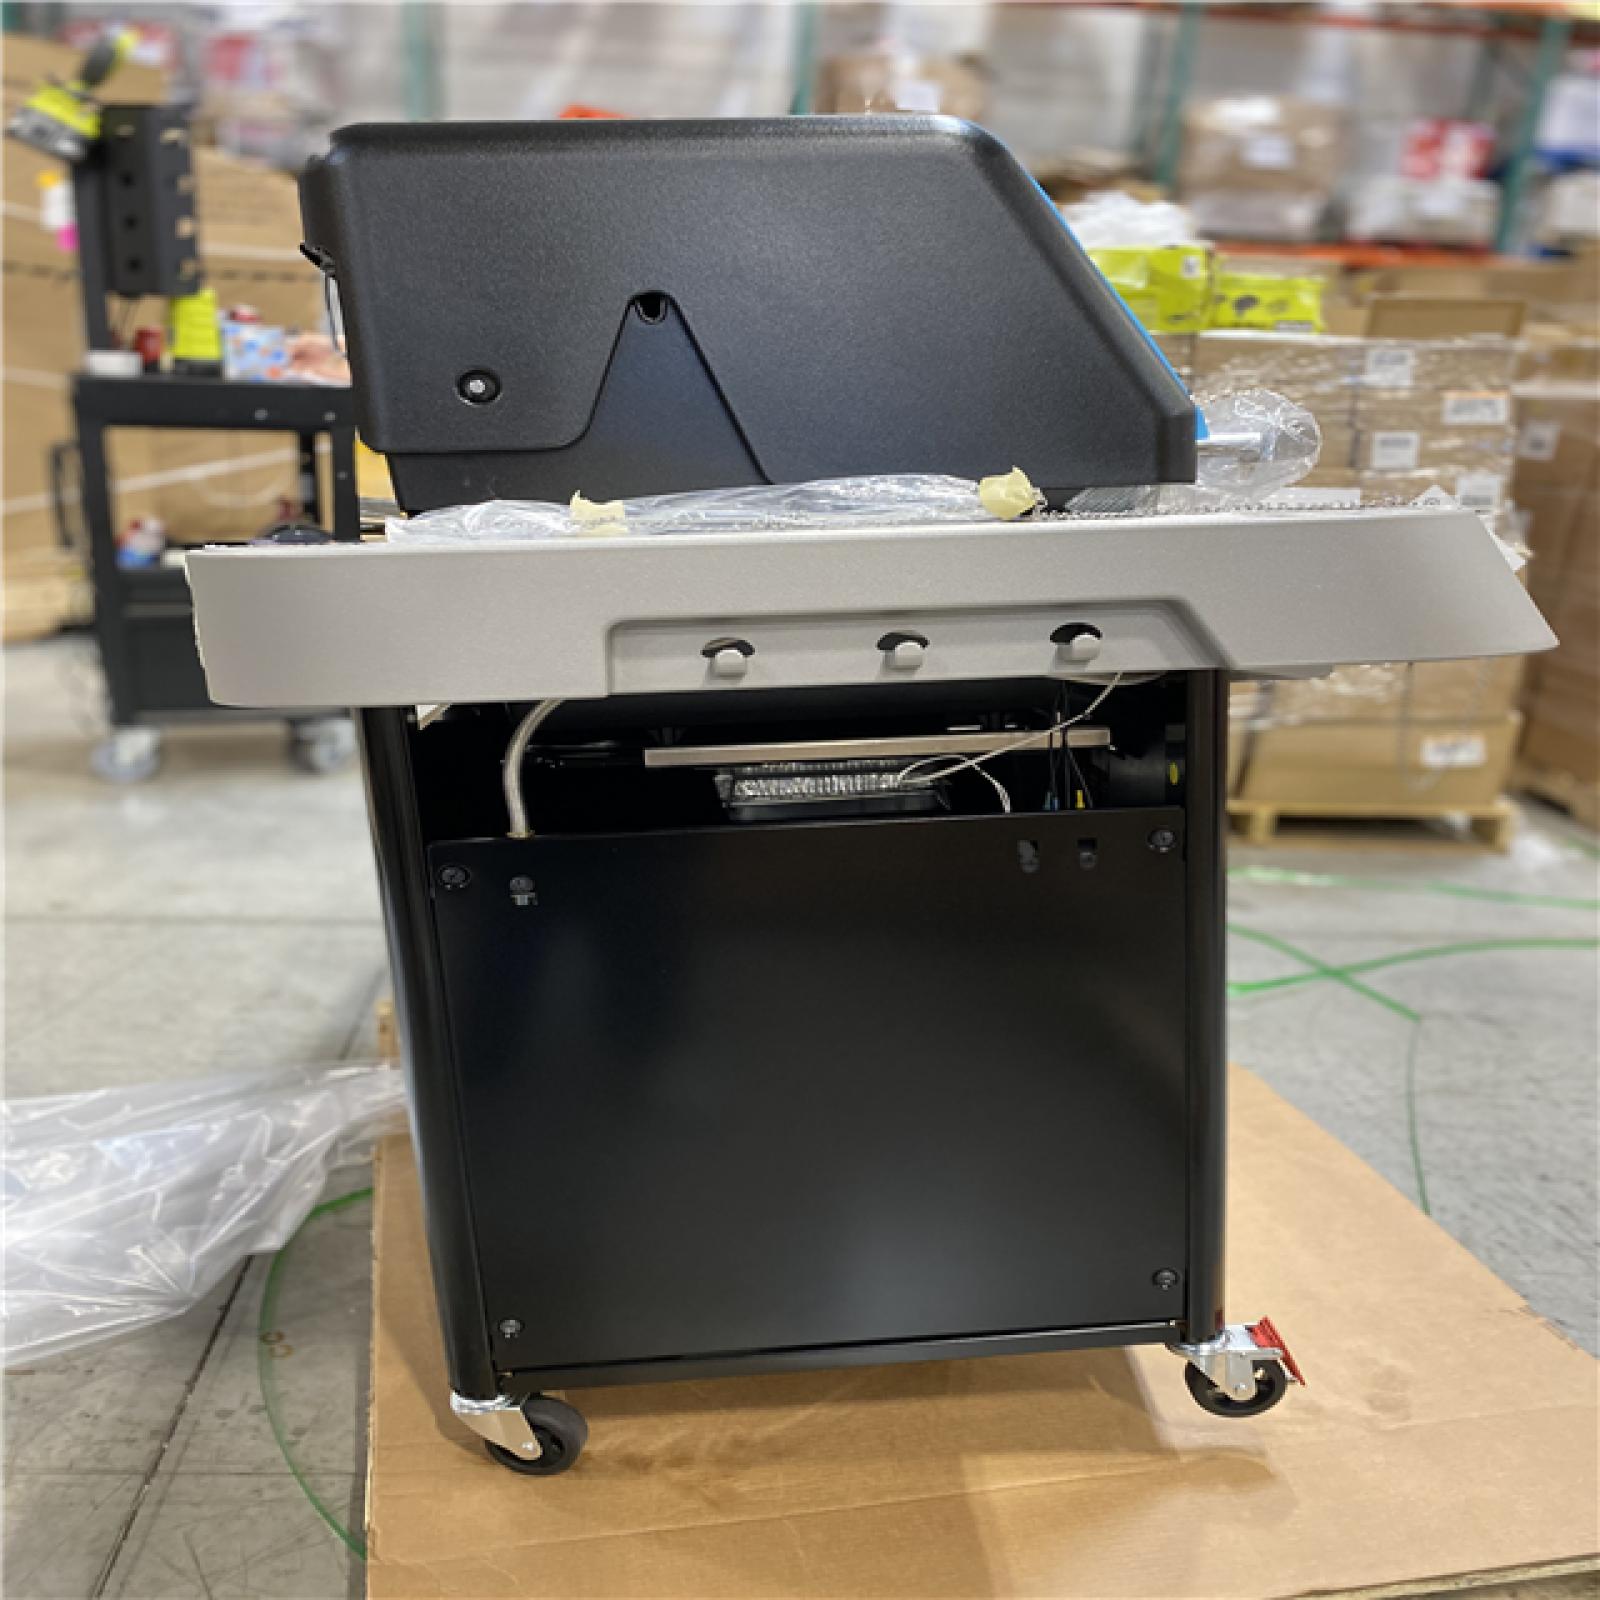 DALLAS LOCATION - Weber Genesis Smart SX-325s 3-Burner Natural Gas Grill in Stainless Steel with Connect Smart Grilling Technology